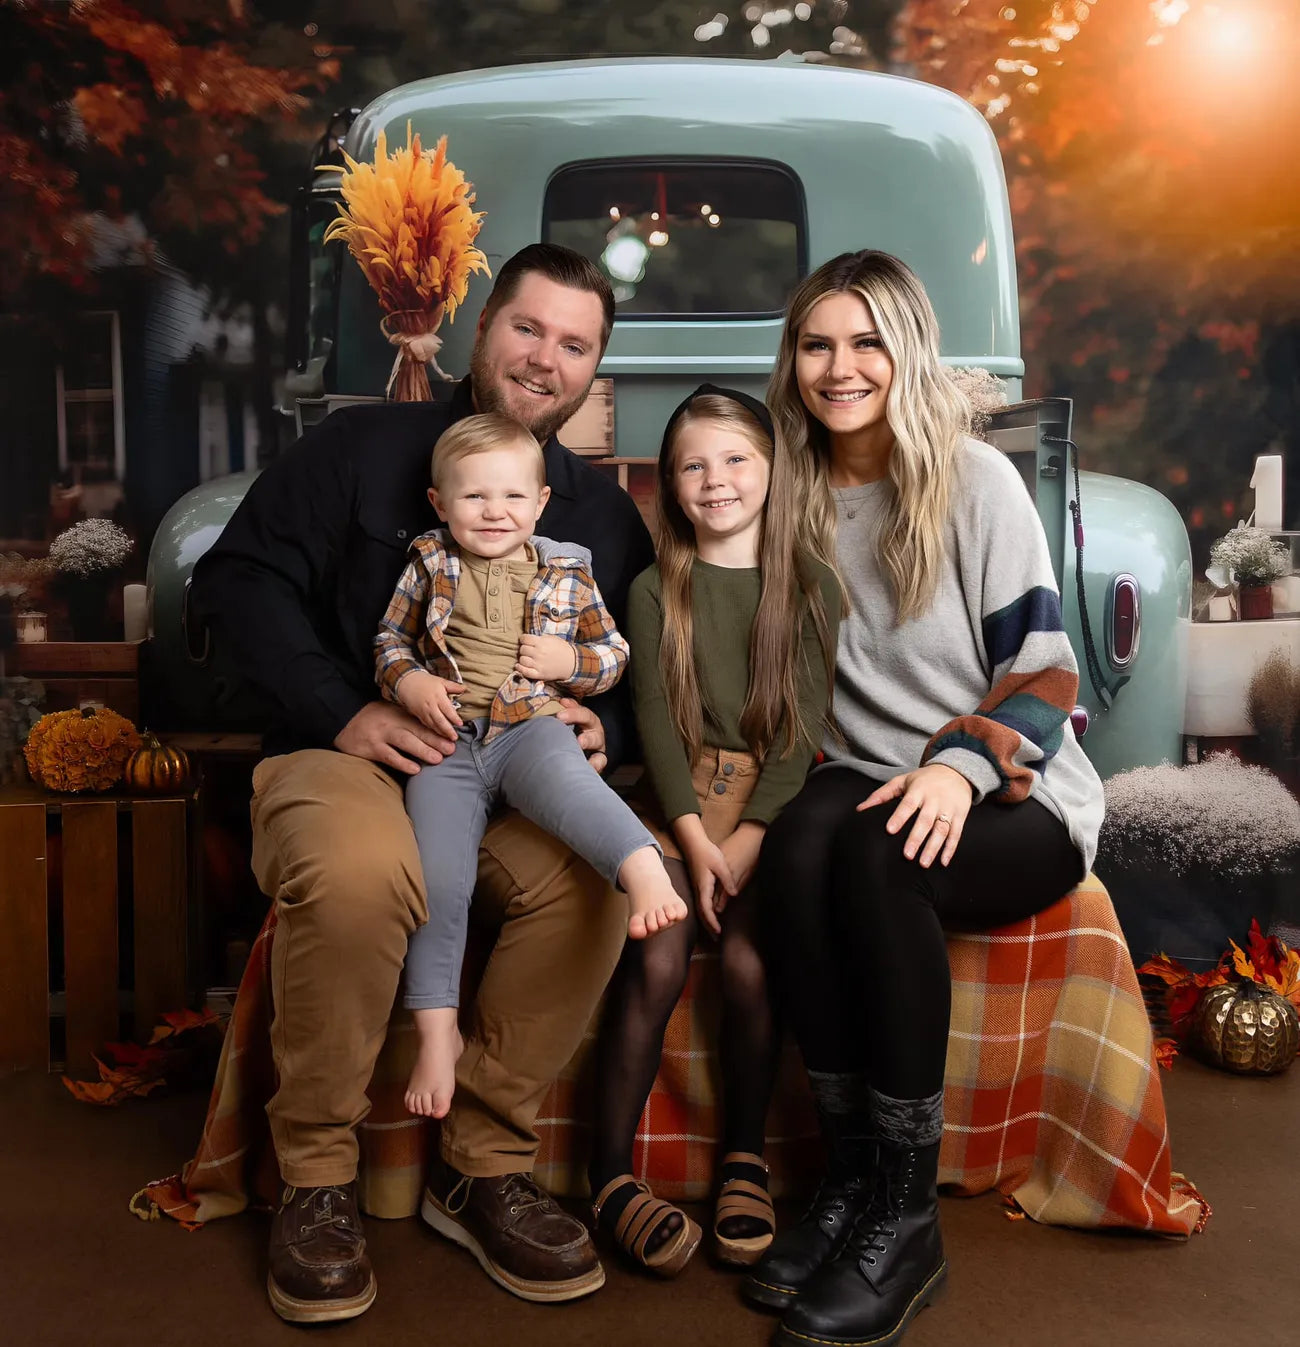 Kate Fall Truck with Pumpkins Fleece Backdrop for Photography